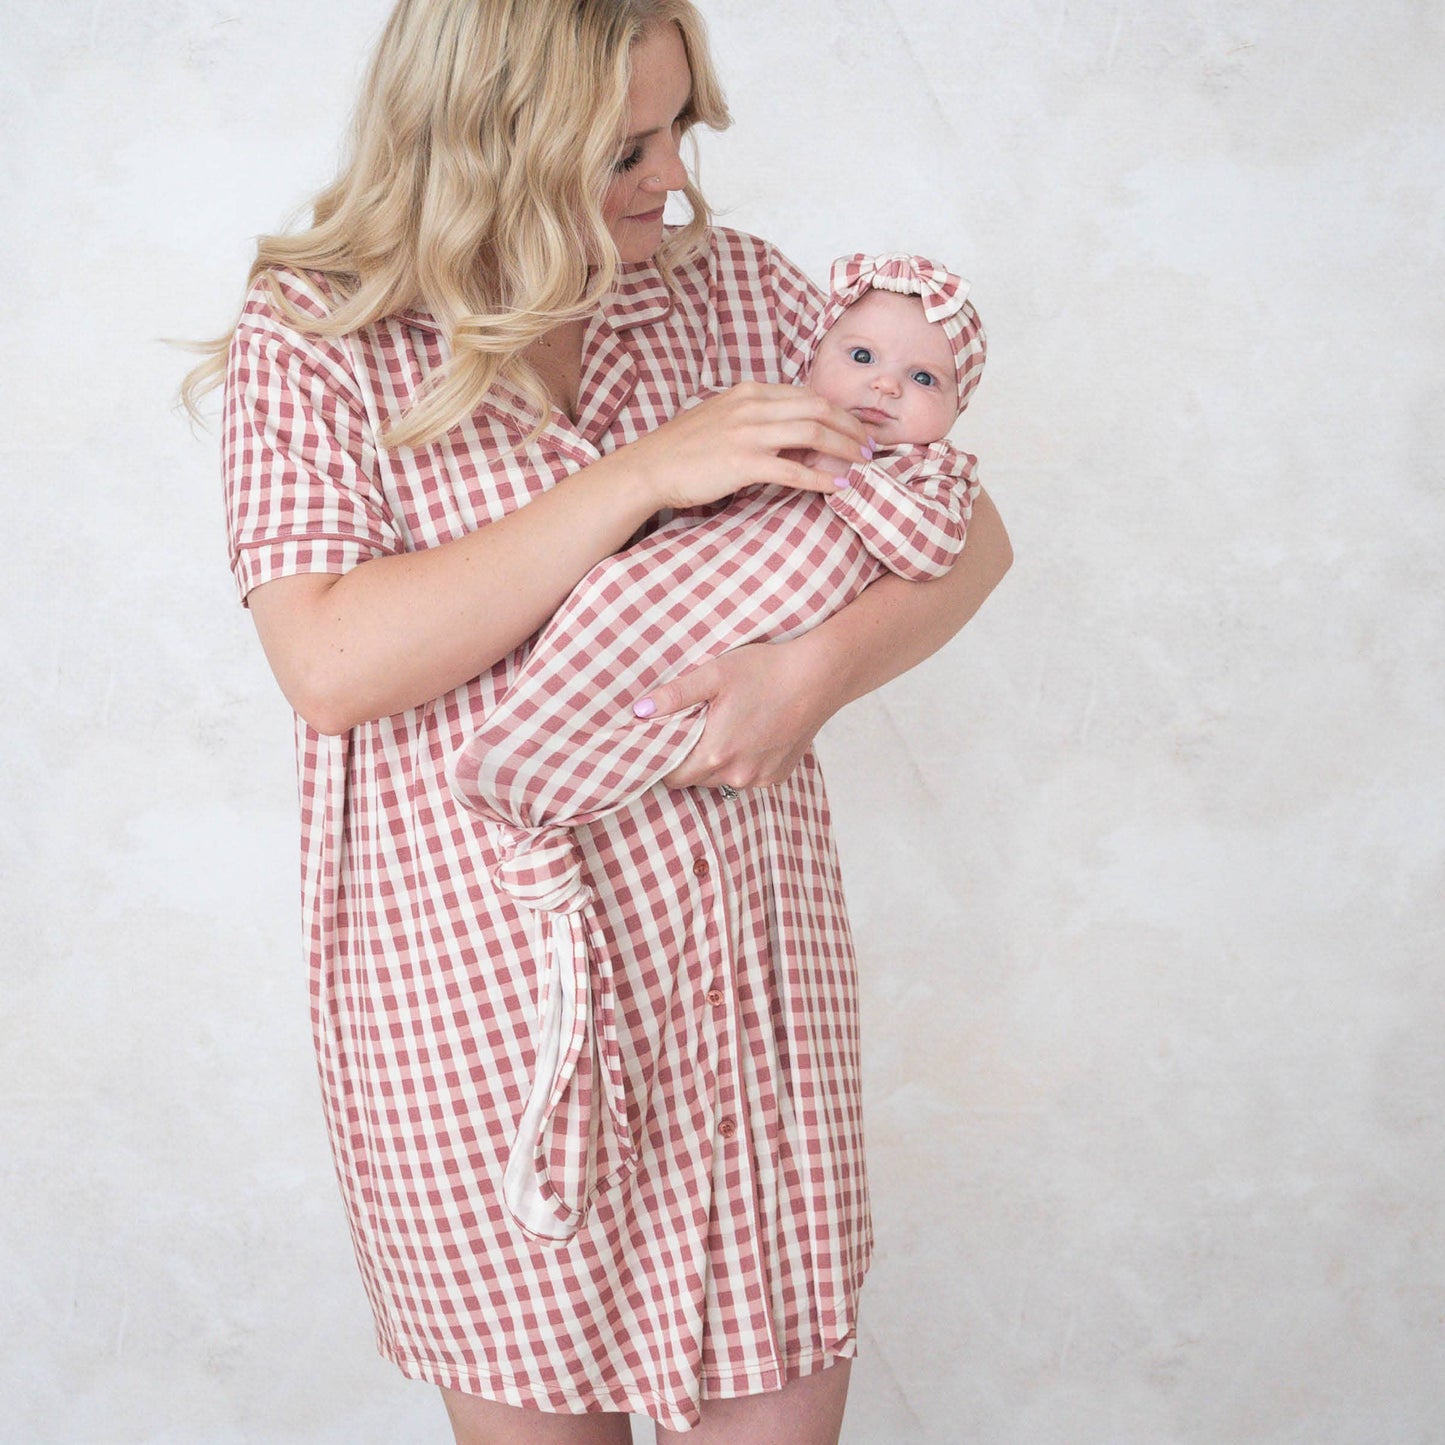 Brixton Phoenix - Berry Gingham | Bamboo Knotted Gown